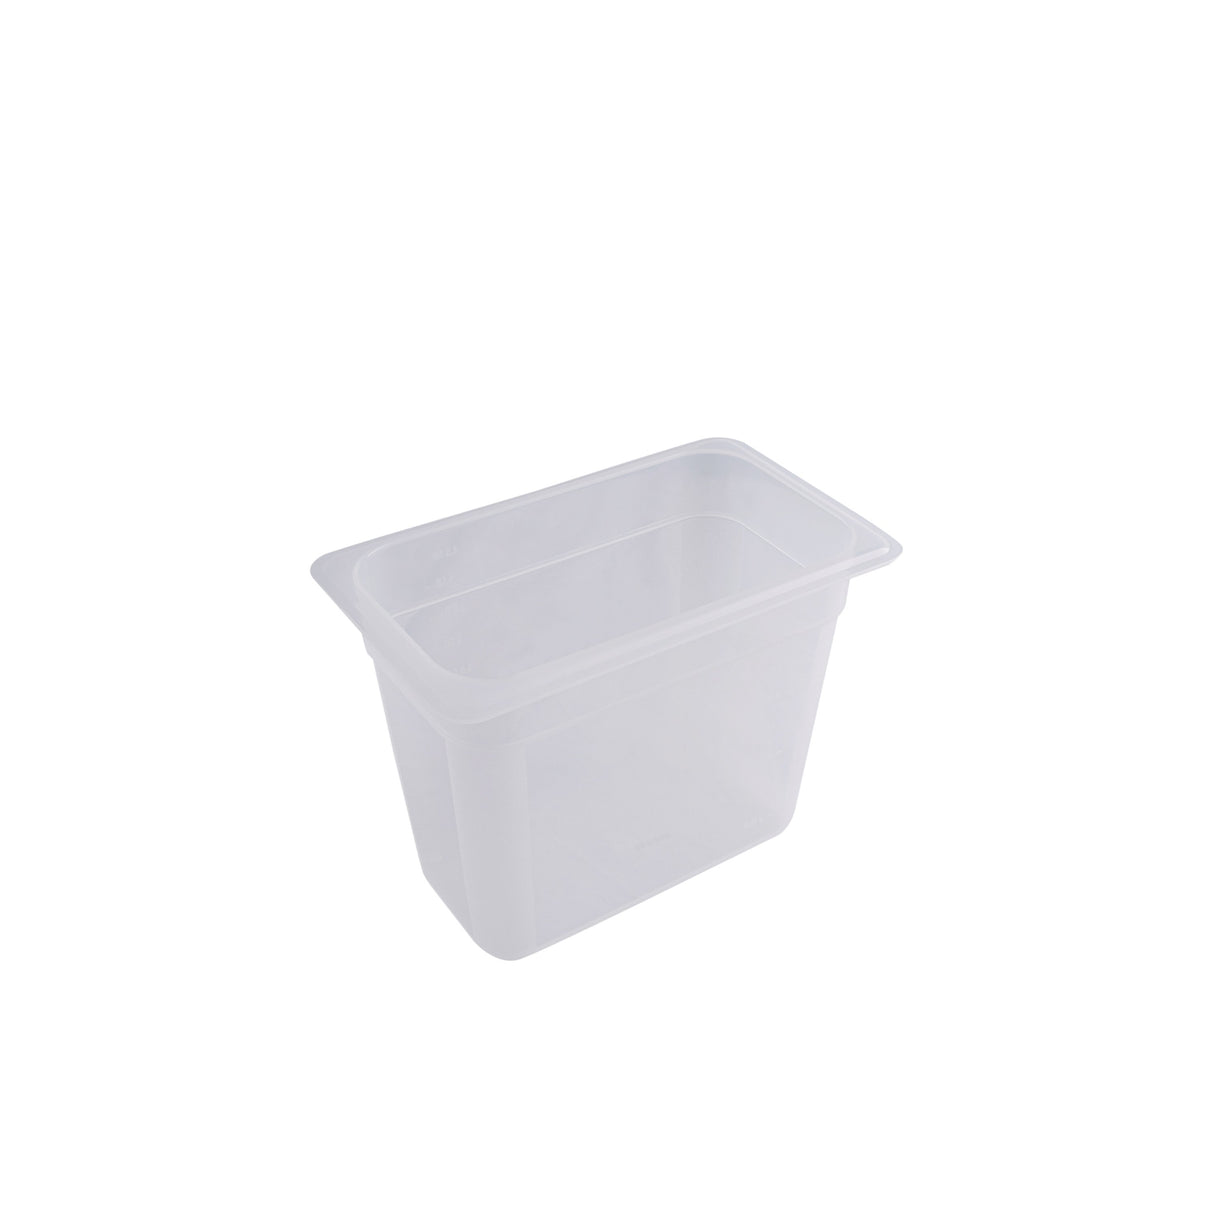 Food Pan - 1/4 Size, 200Mm from Gastroplast. Sold in boxes of 1. Hospitality quality at wholesale price with The Flying Fork! 